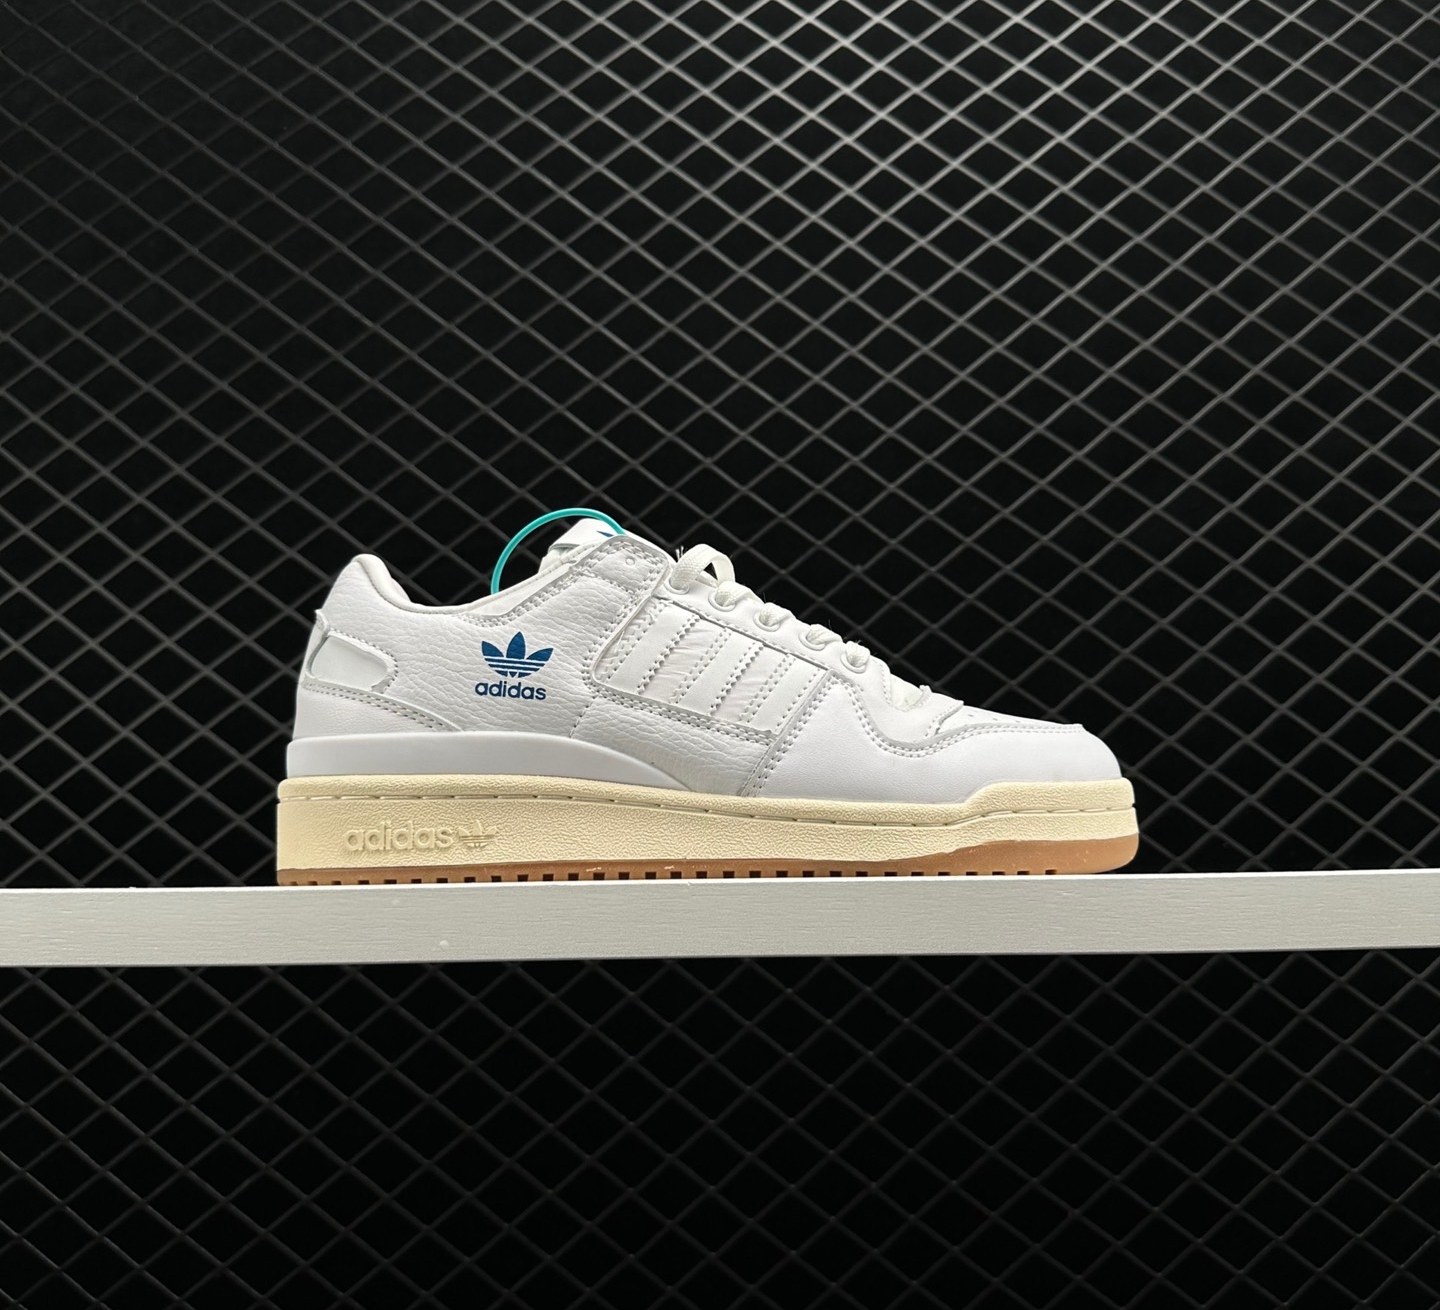 Adidas Forum 84 White Blue Bird H04903 - Classic Style Sneakers